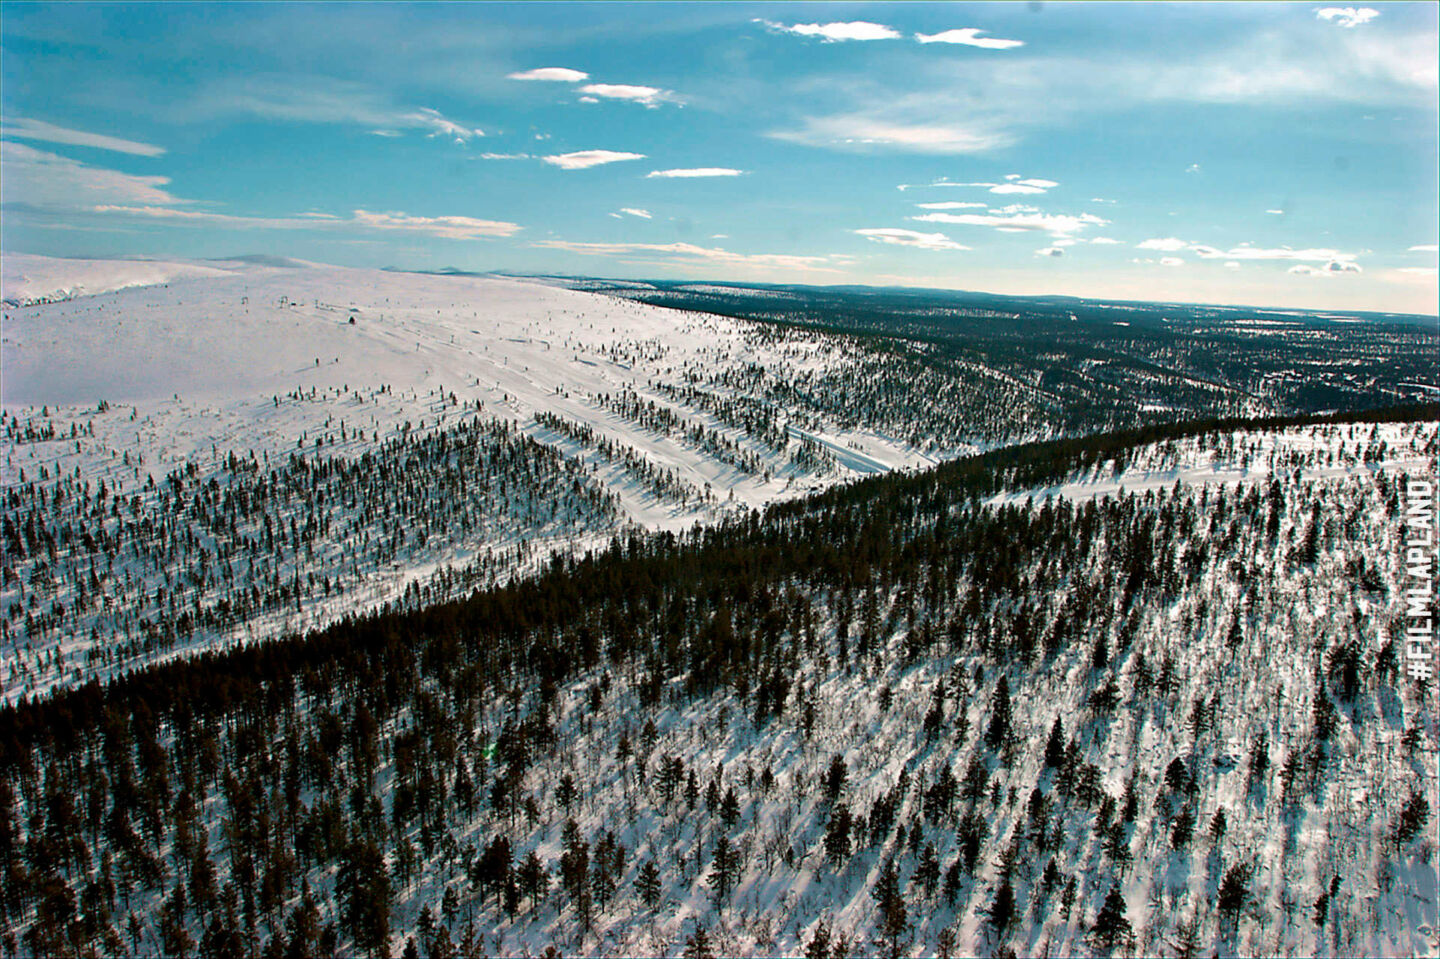 A snowy forest canyon in Inari, a Finnish Lapland filming location